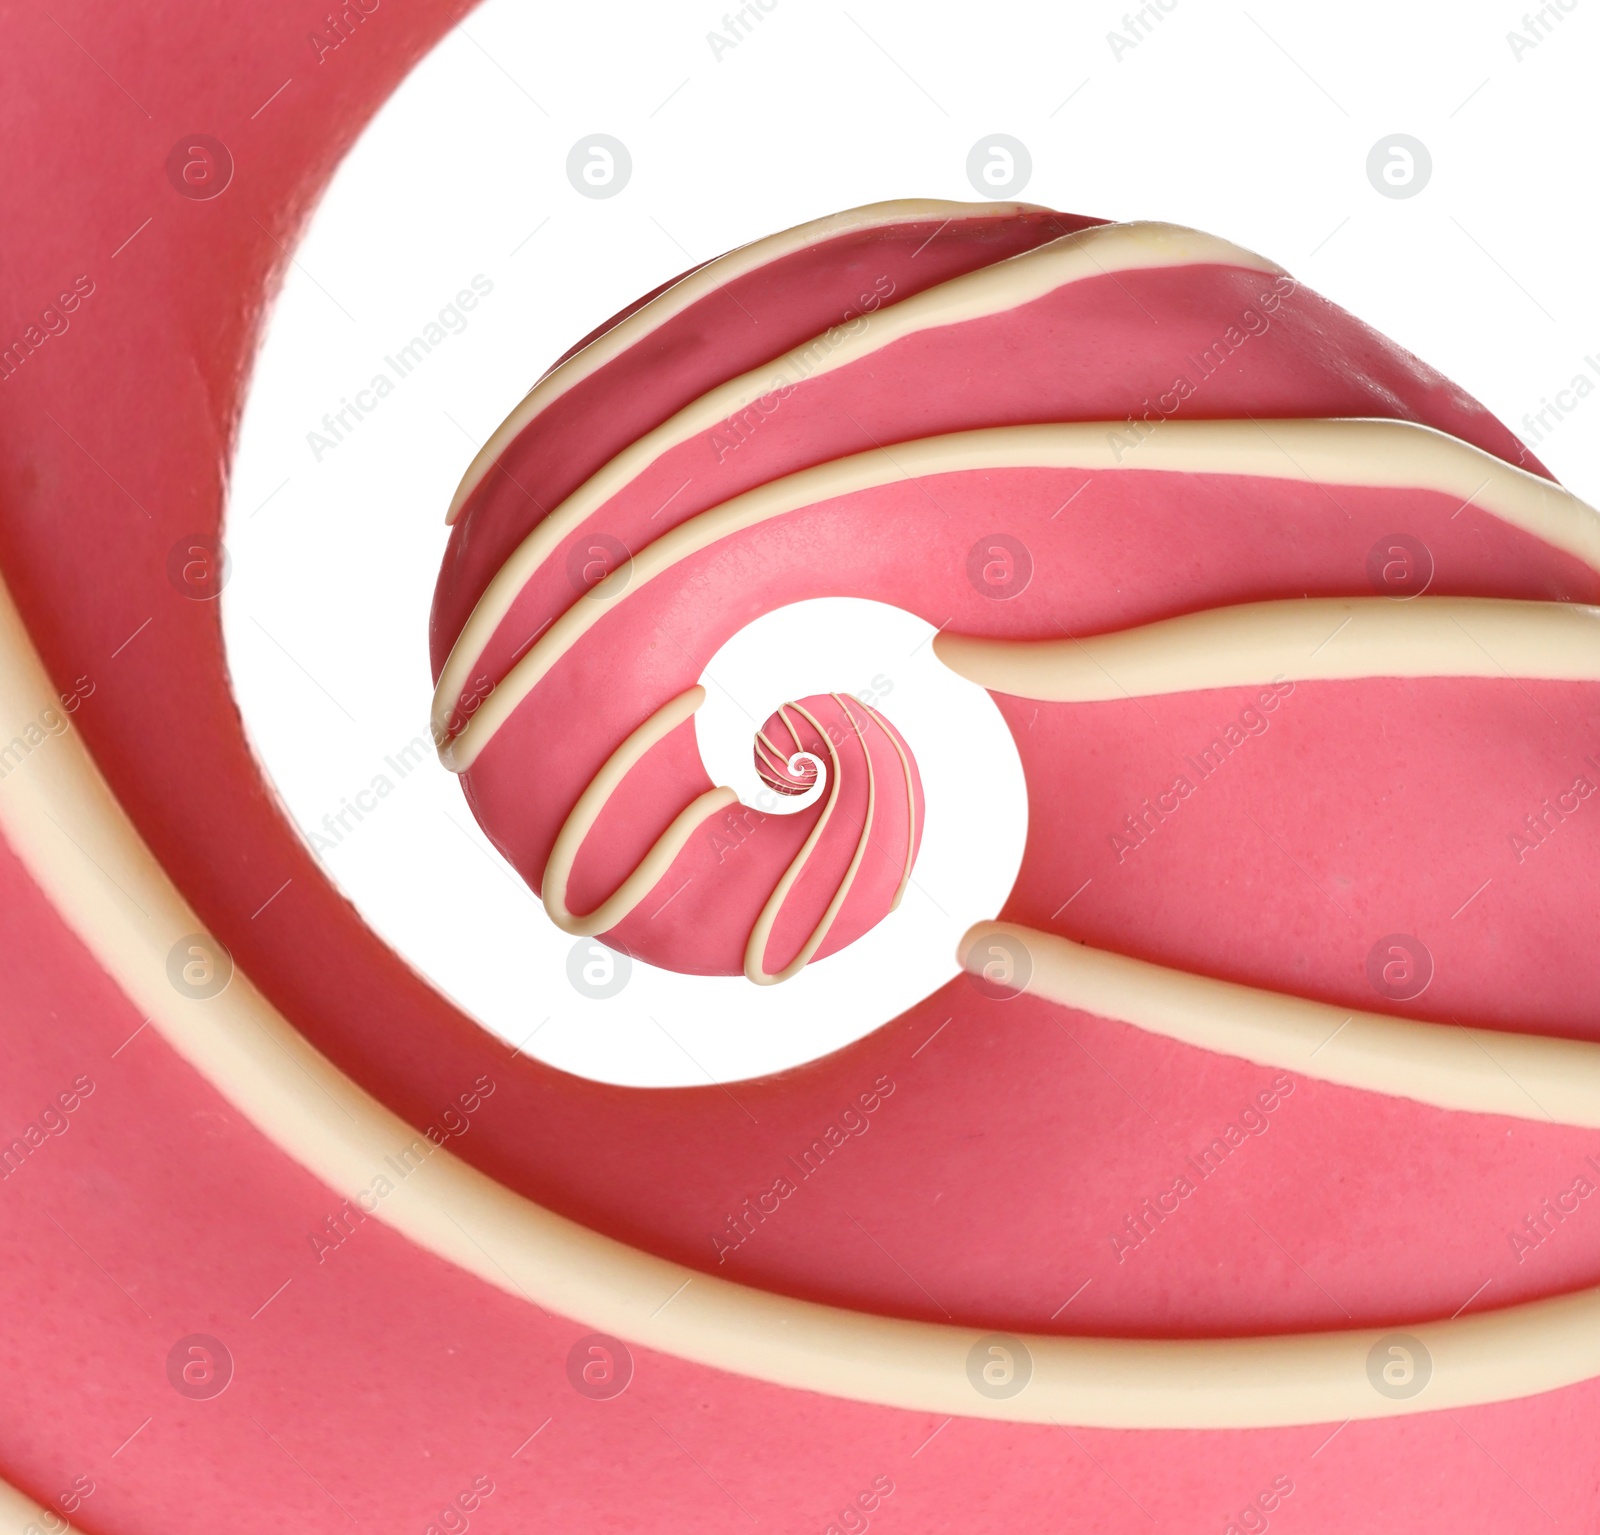 Image of Twisted donut with strawberry icing and topping on white background, spiral effect